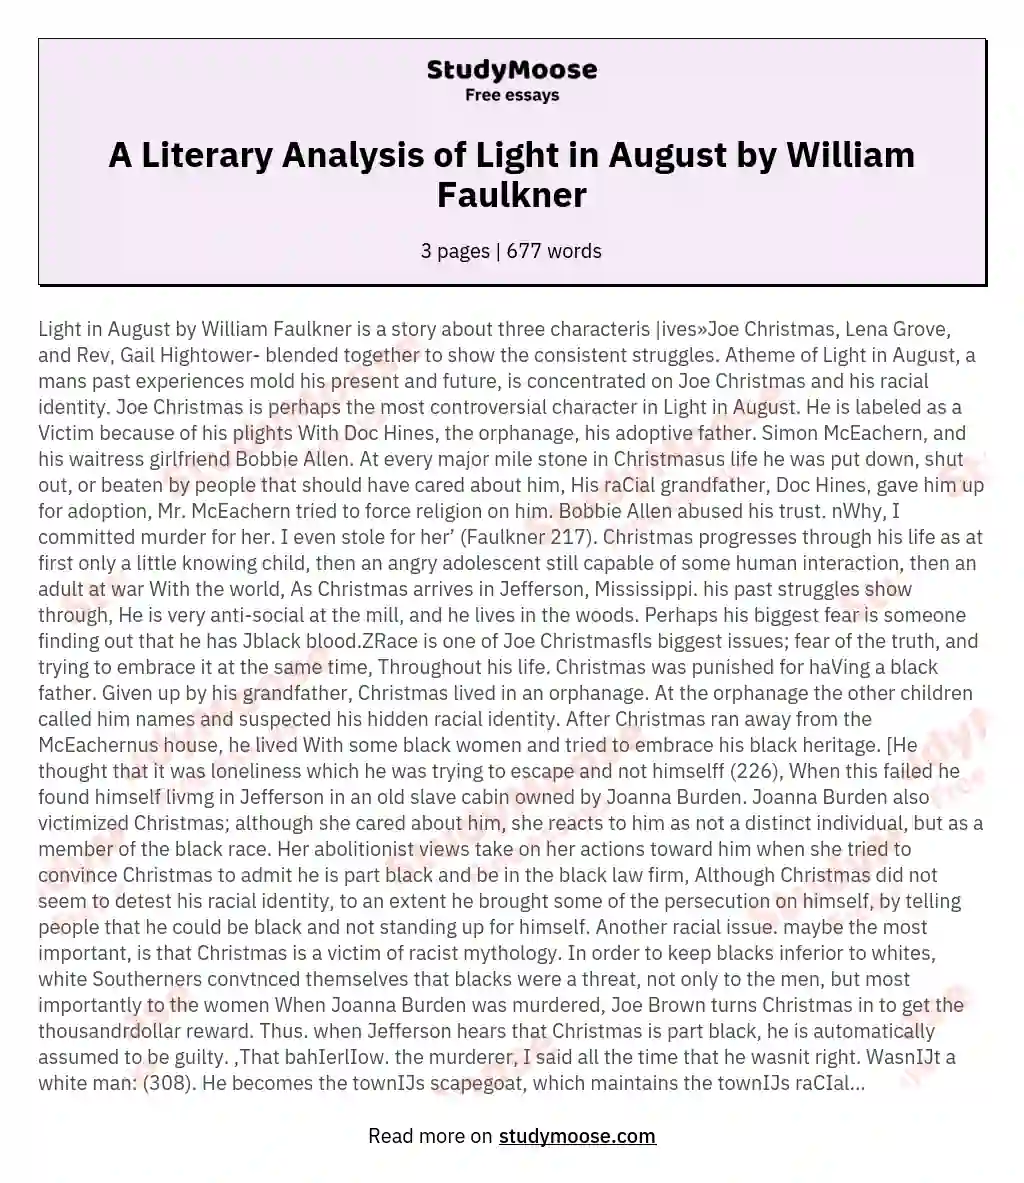 A Literary Analysis of Light in August by William Faulkner essay